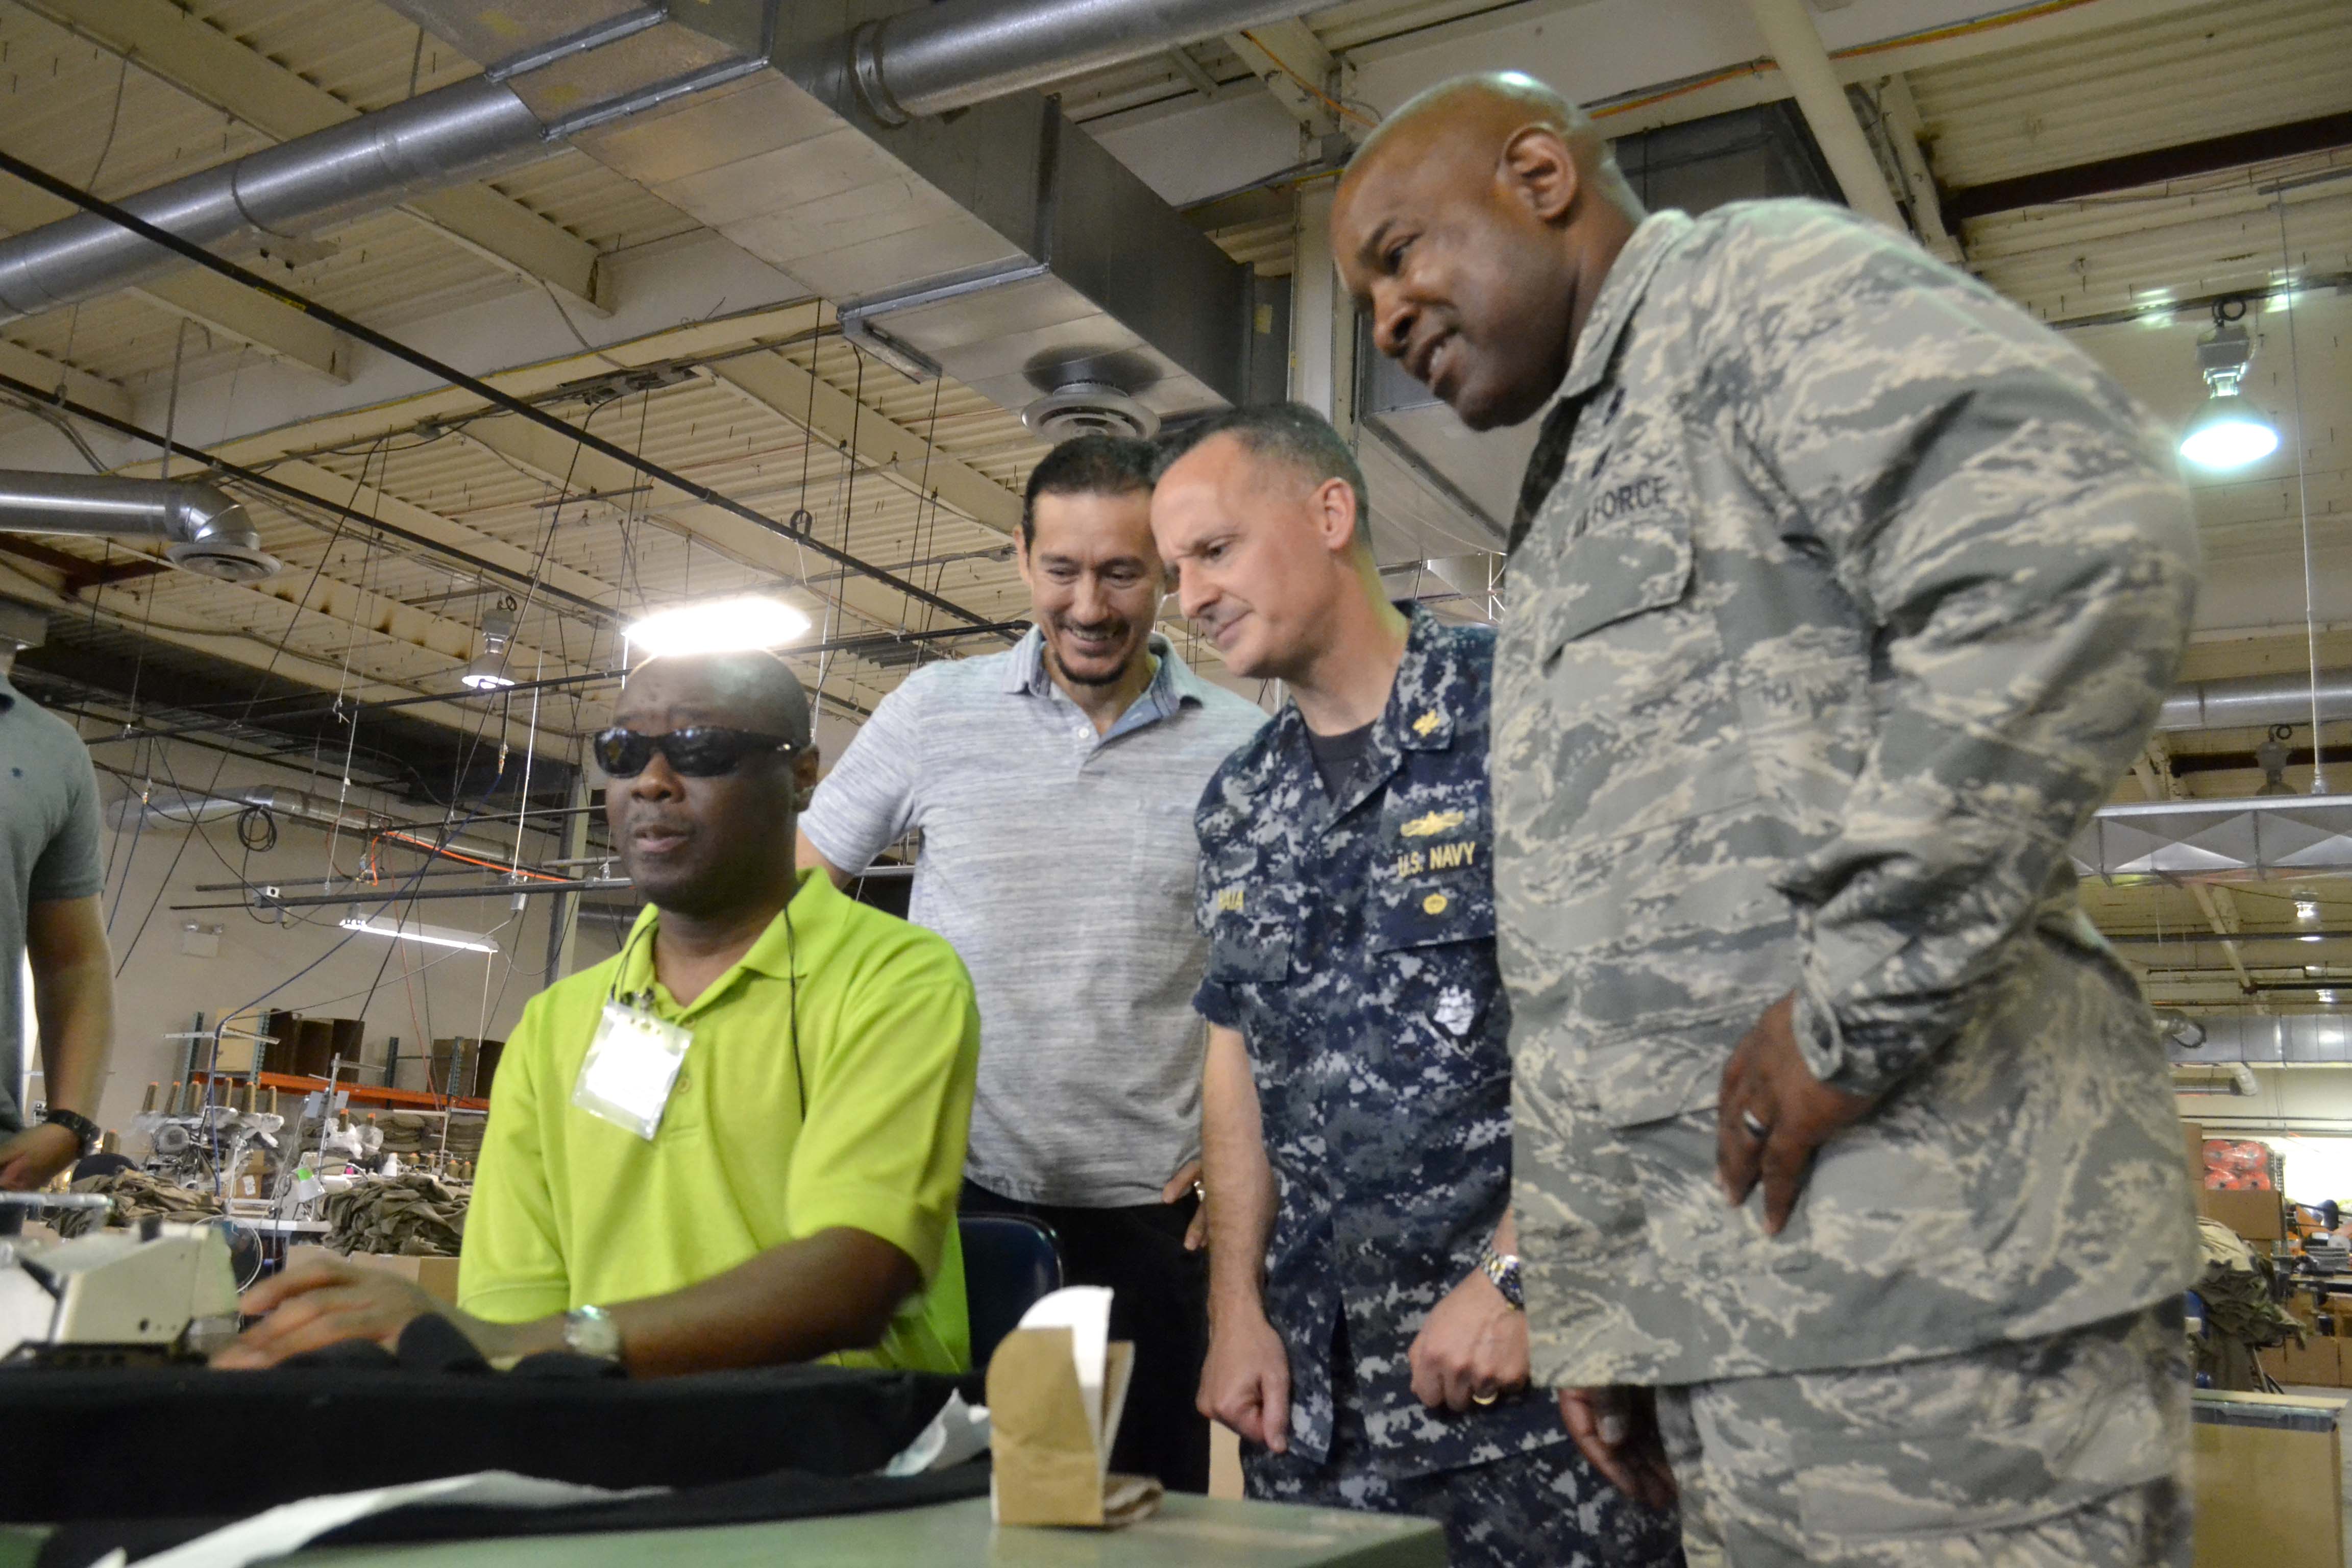 Troop Support leaders impressed by blind employees at local manufacturer